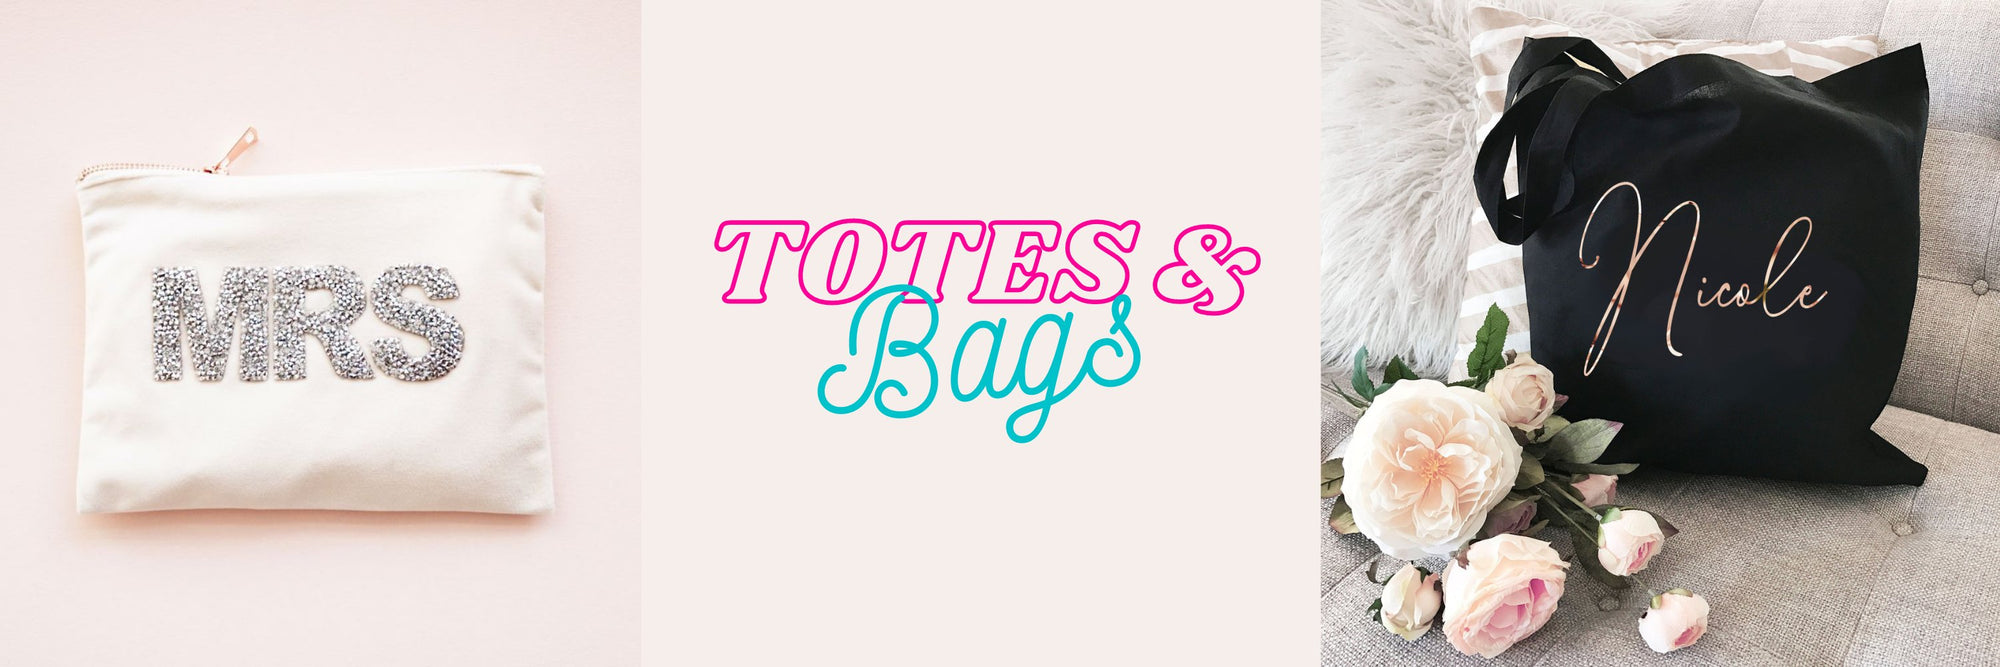 Tote bags and purses